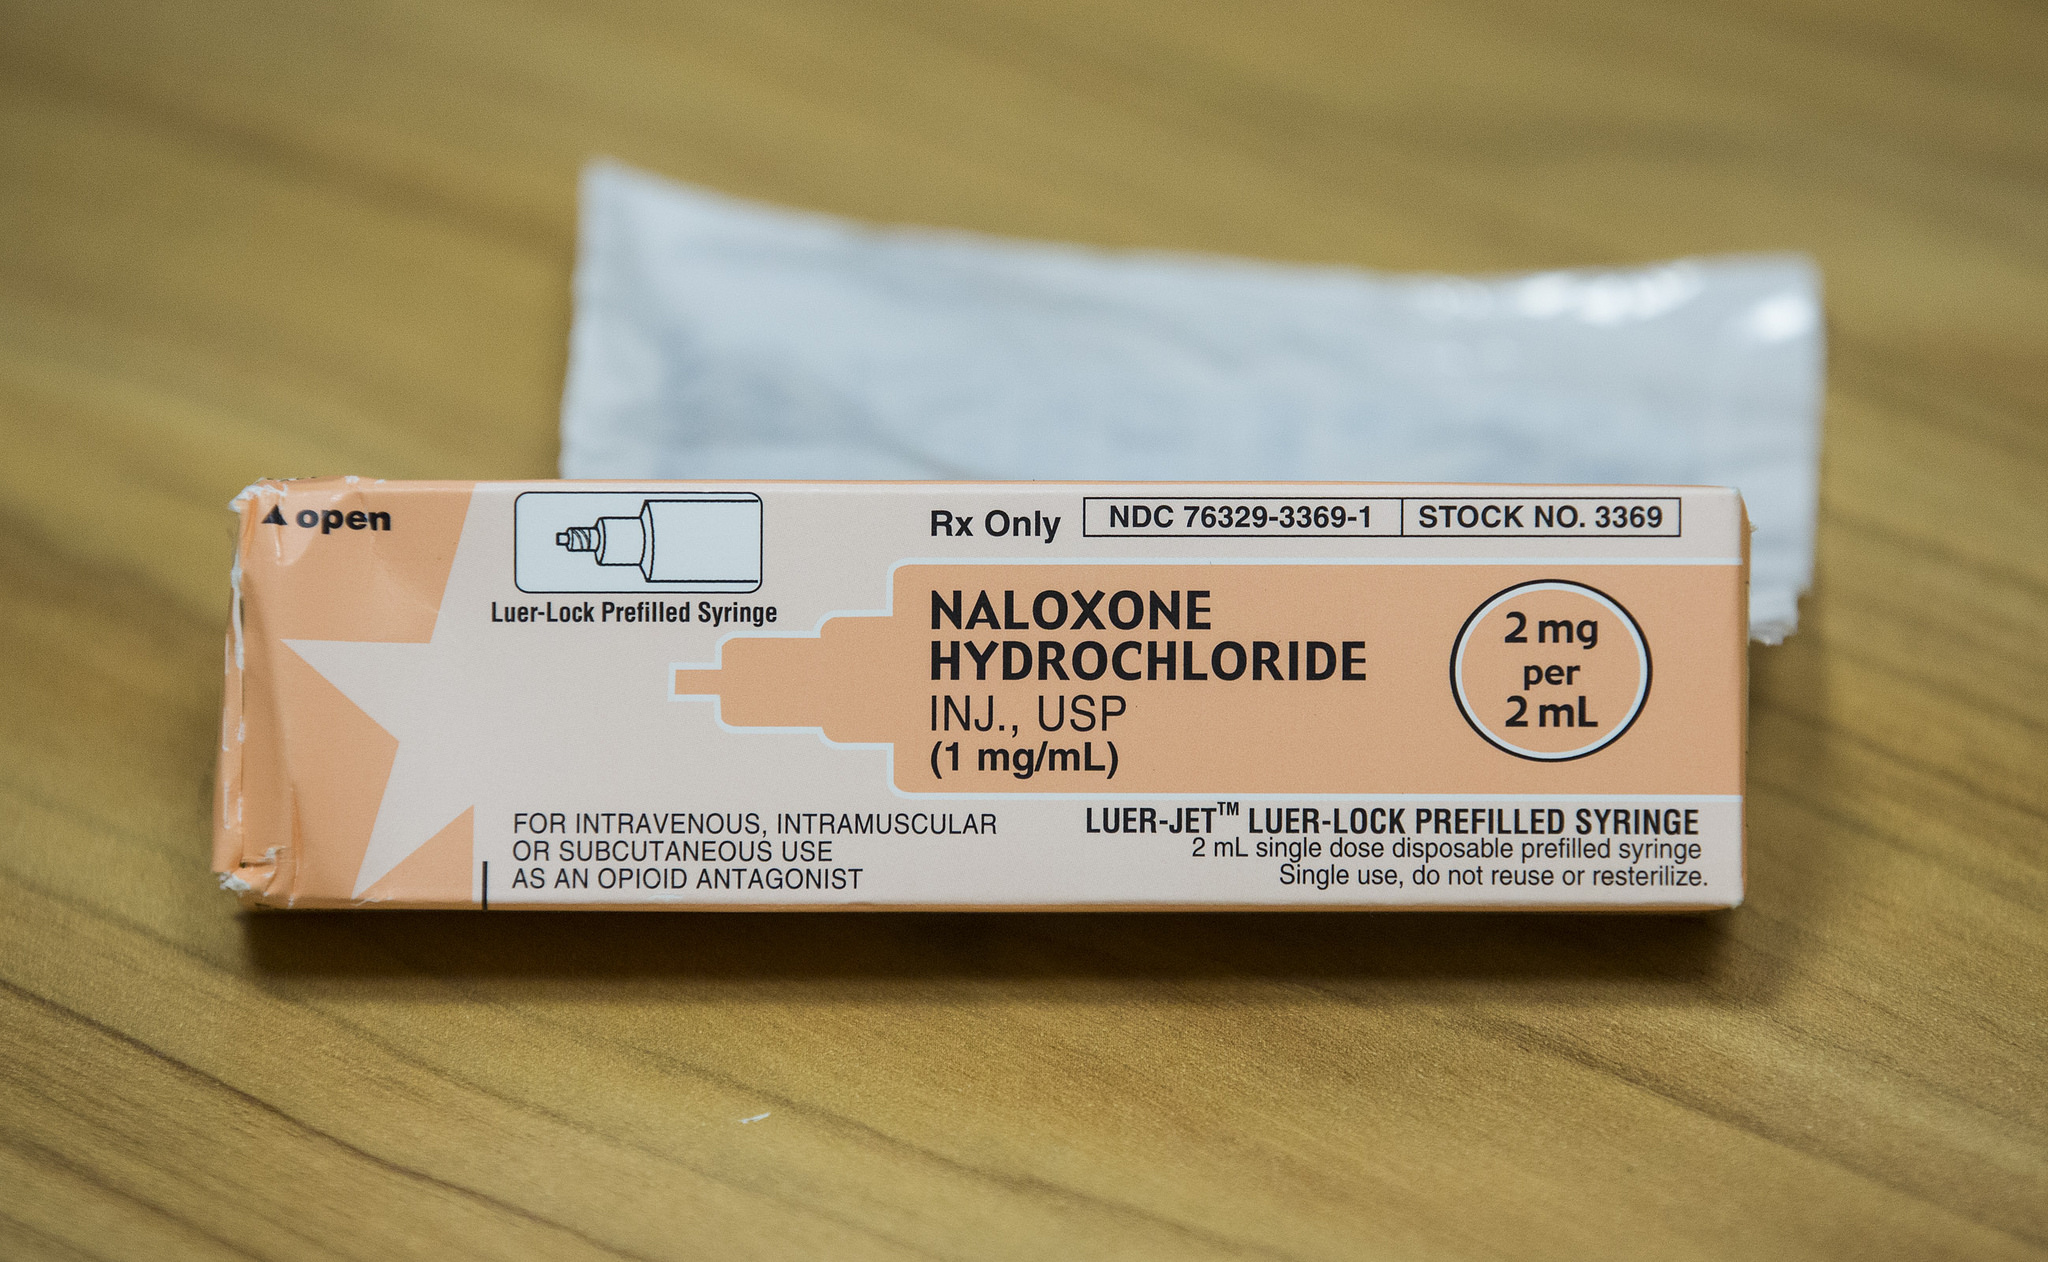 Photo caption: Naloxone is a medication that blocks the effects of opioids such as heroin and similar prescription drugs.				                                                       Image available for reuse